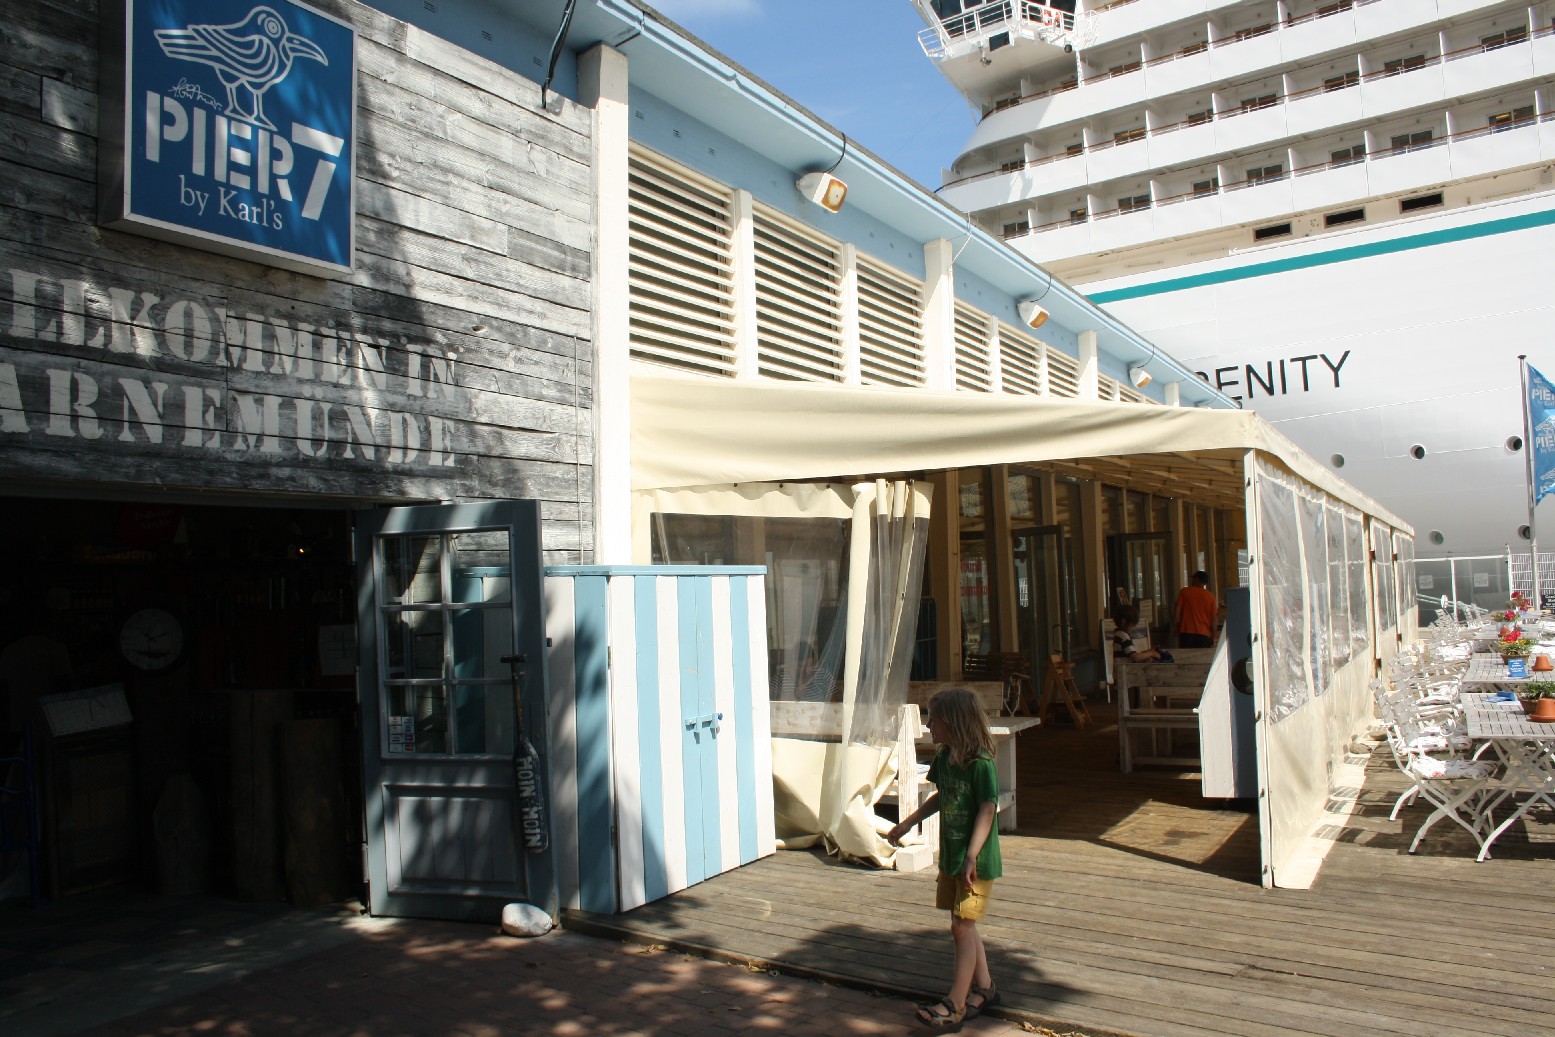 "Pier 7" combines cruiser watching, a child-friendly café and of course souvenir shopping for all tastes.